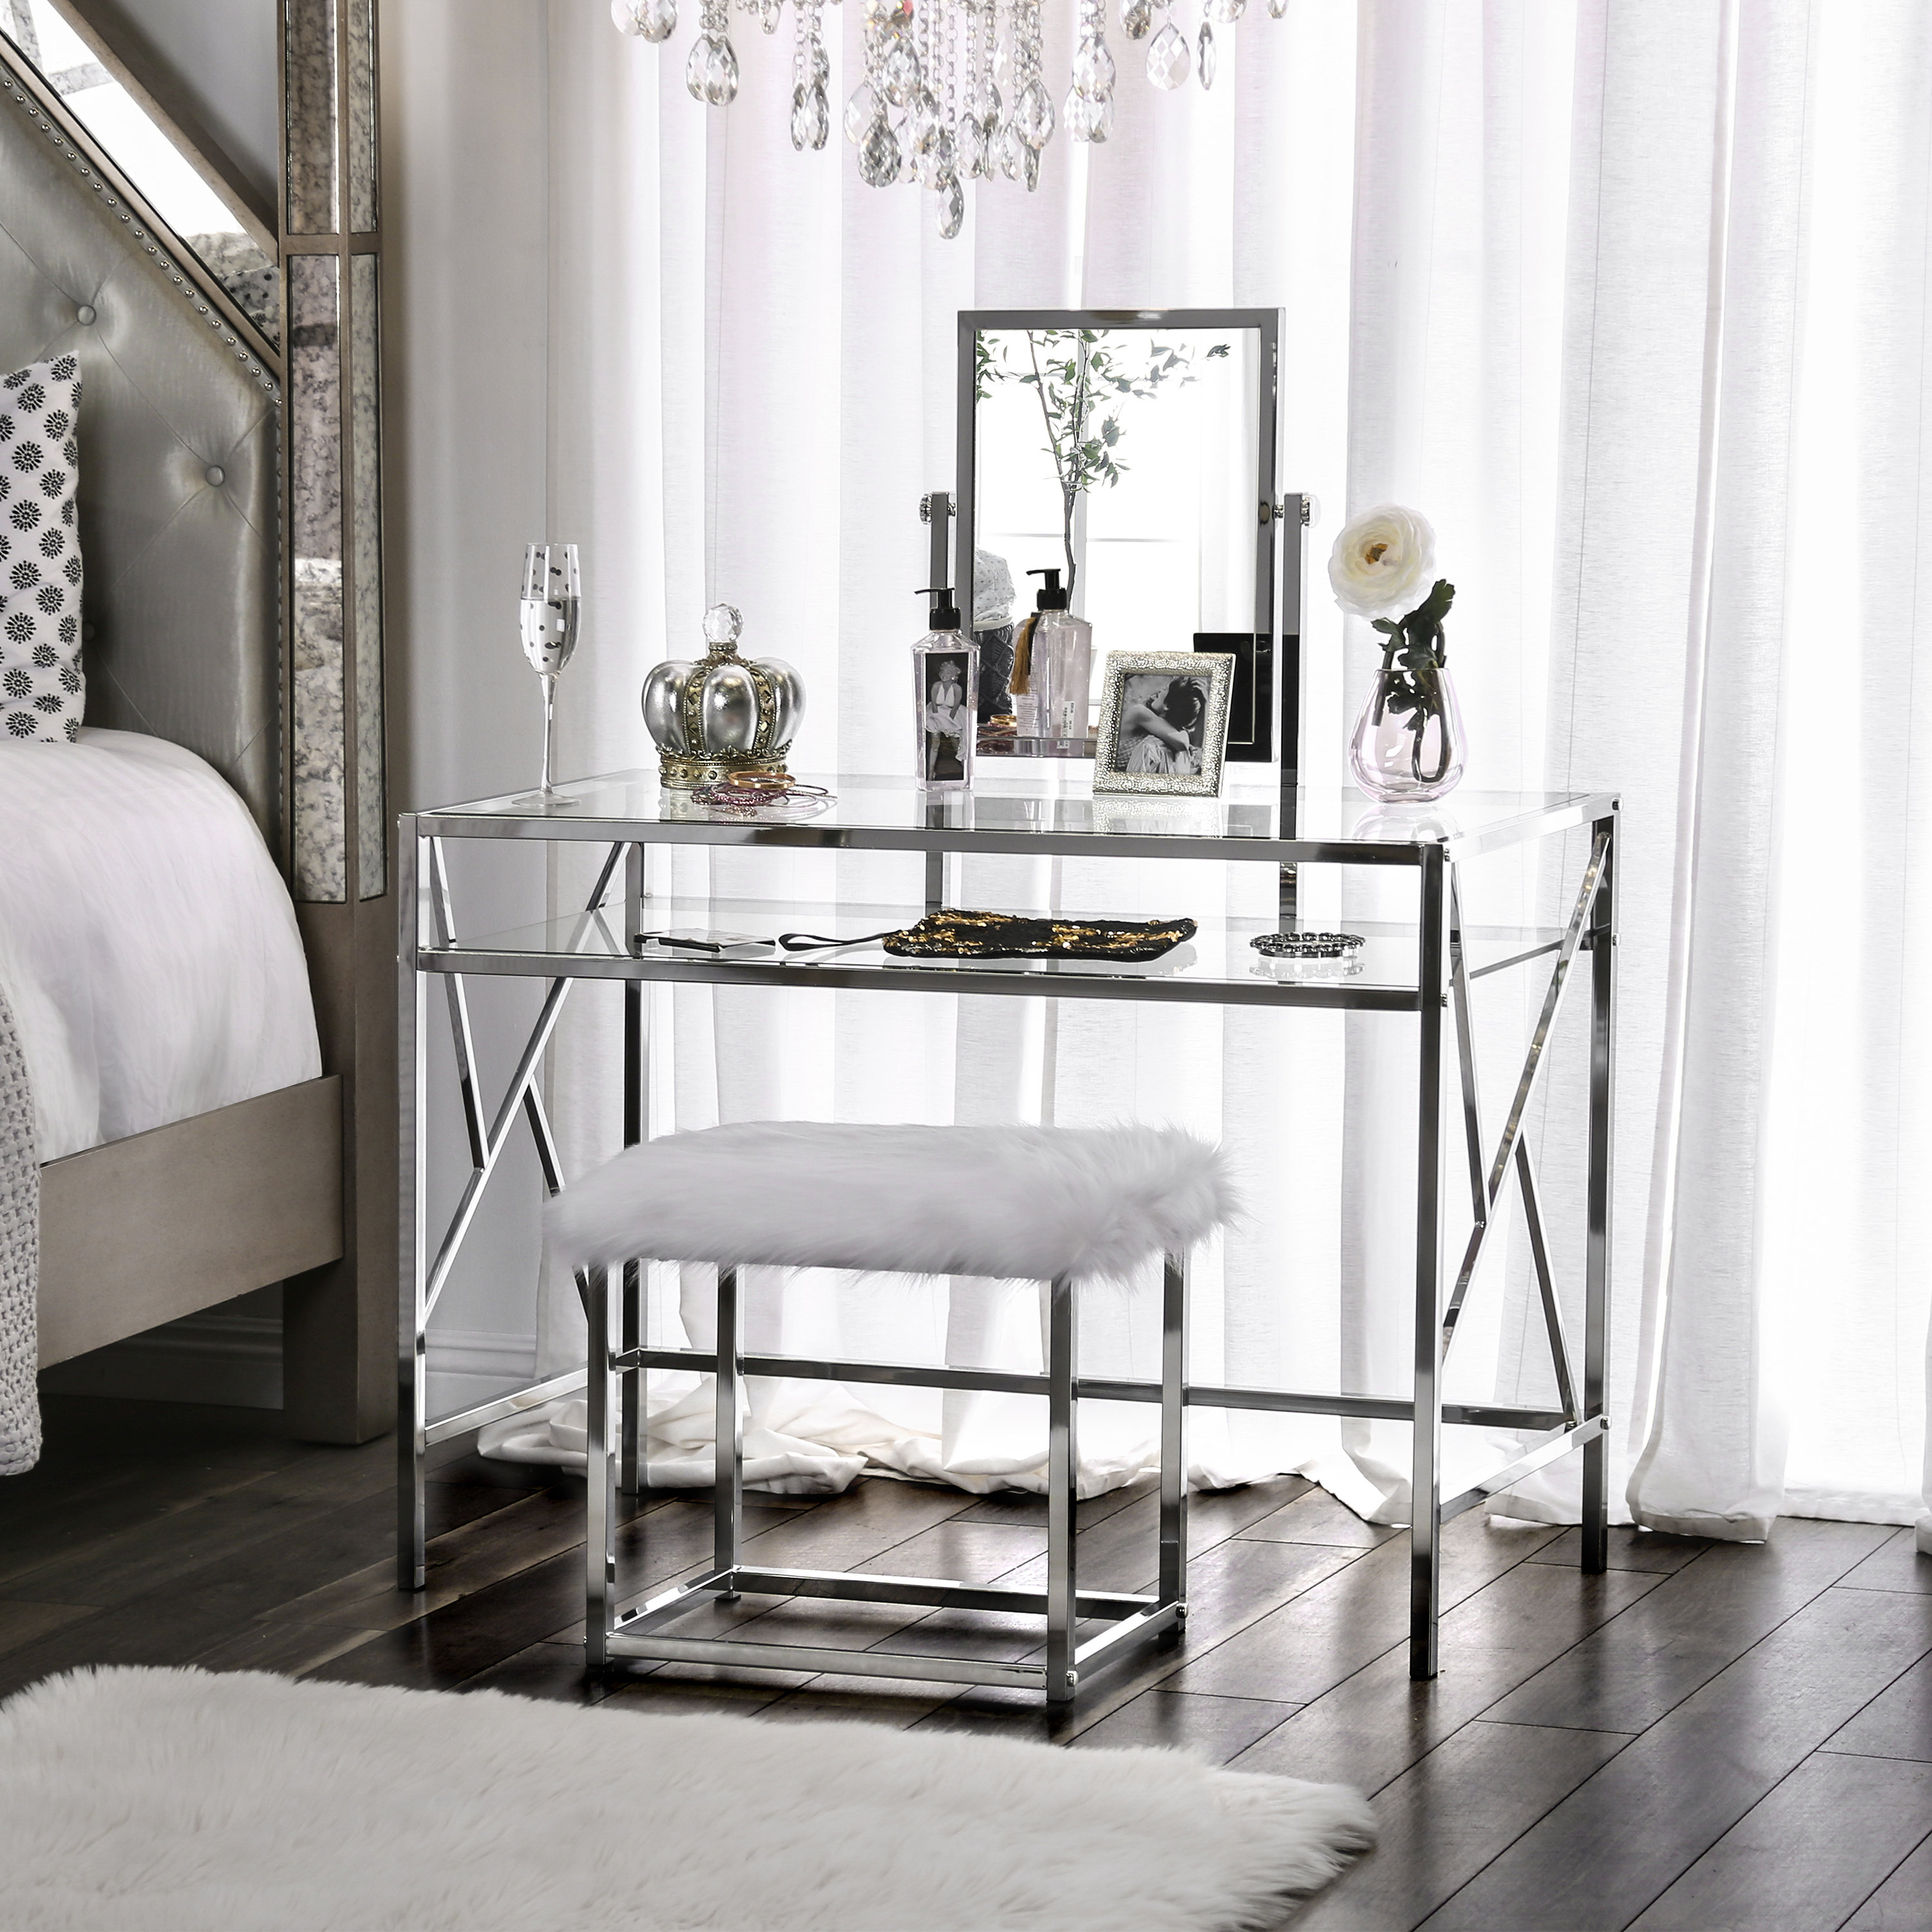 Makeup Tables And Vanities You Ll Love In 2020 Wayfair,How To Make Money As A Graphic Designer